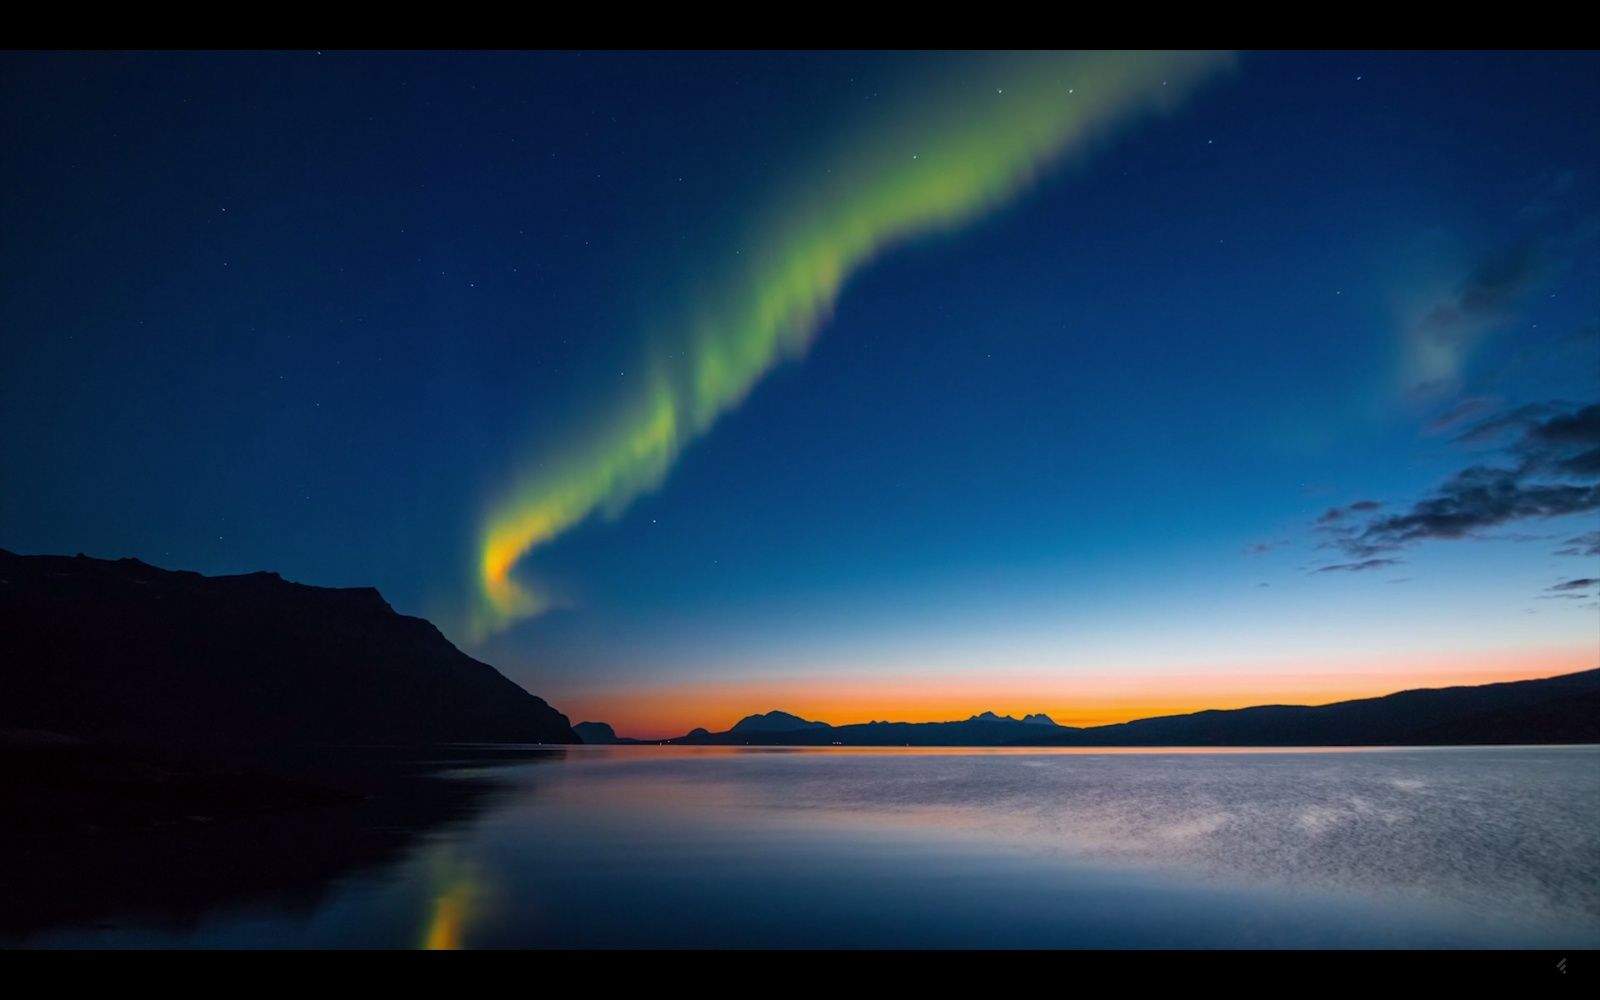 The northern lights over Norway. Screengrab: Cult of Mac